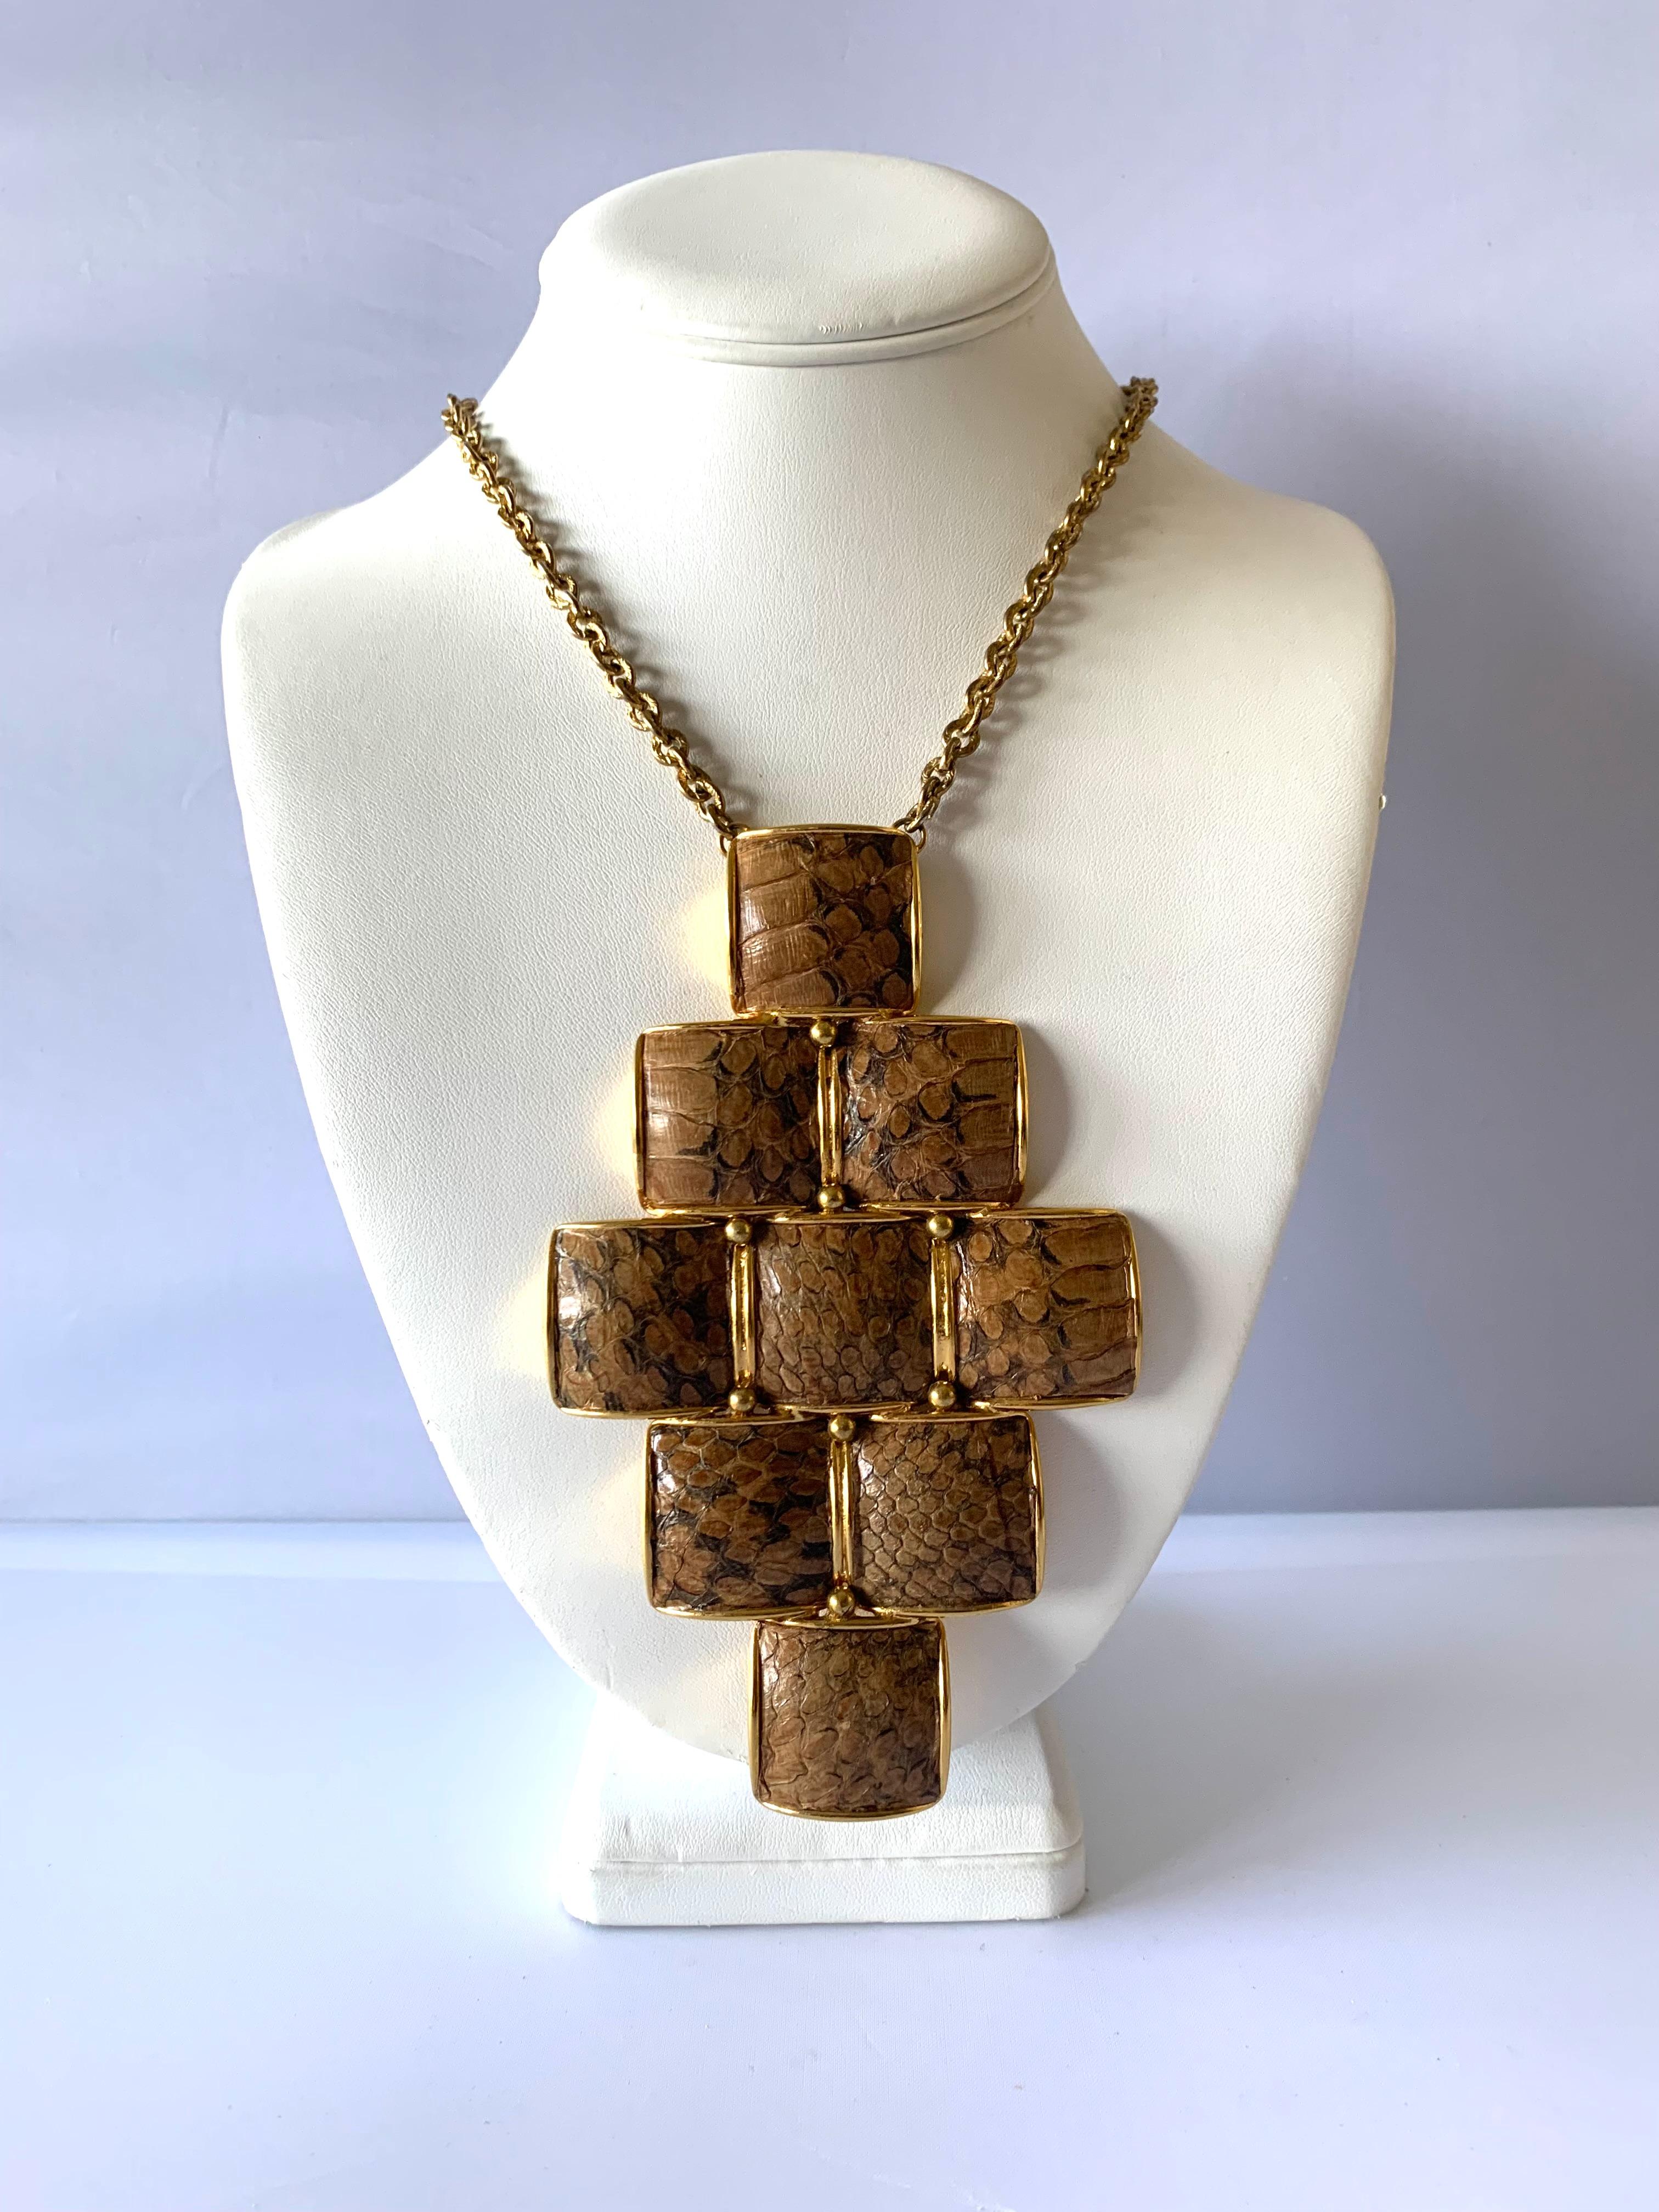 Vintage gilt metal chain snakeskin modernist pendant necklace, by William de Lillo NY. circa 1969, signed piece. The pendant measures 5.50